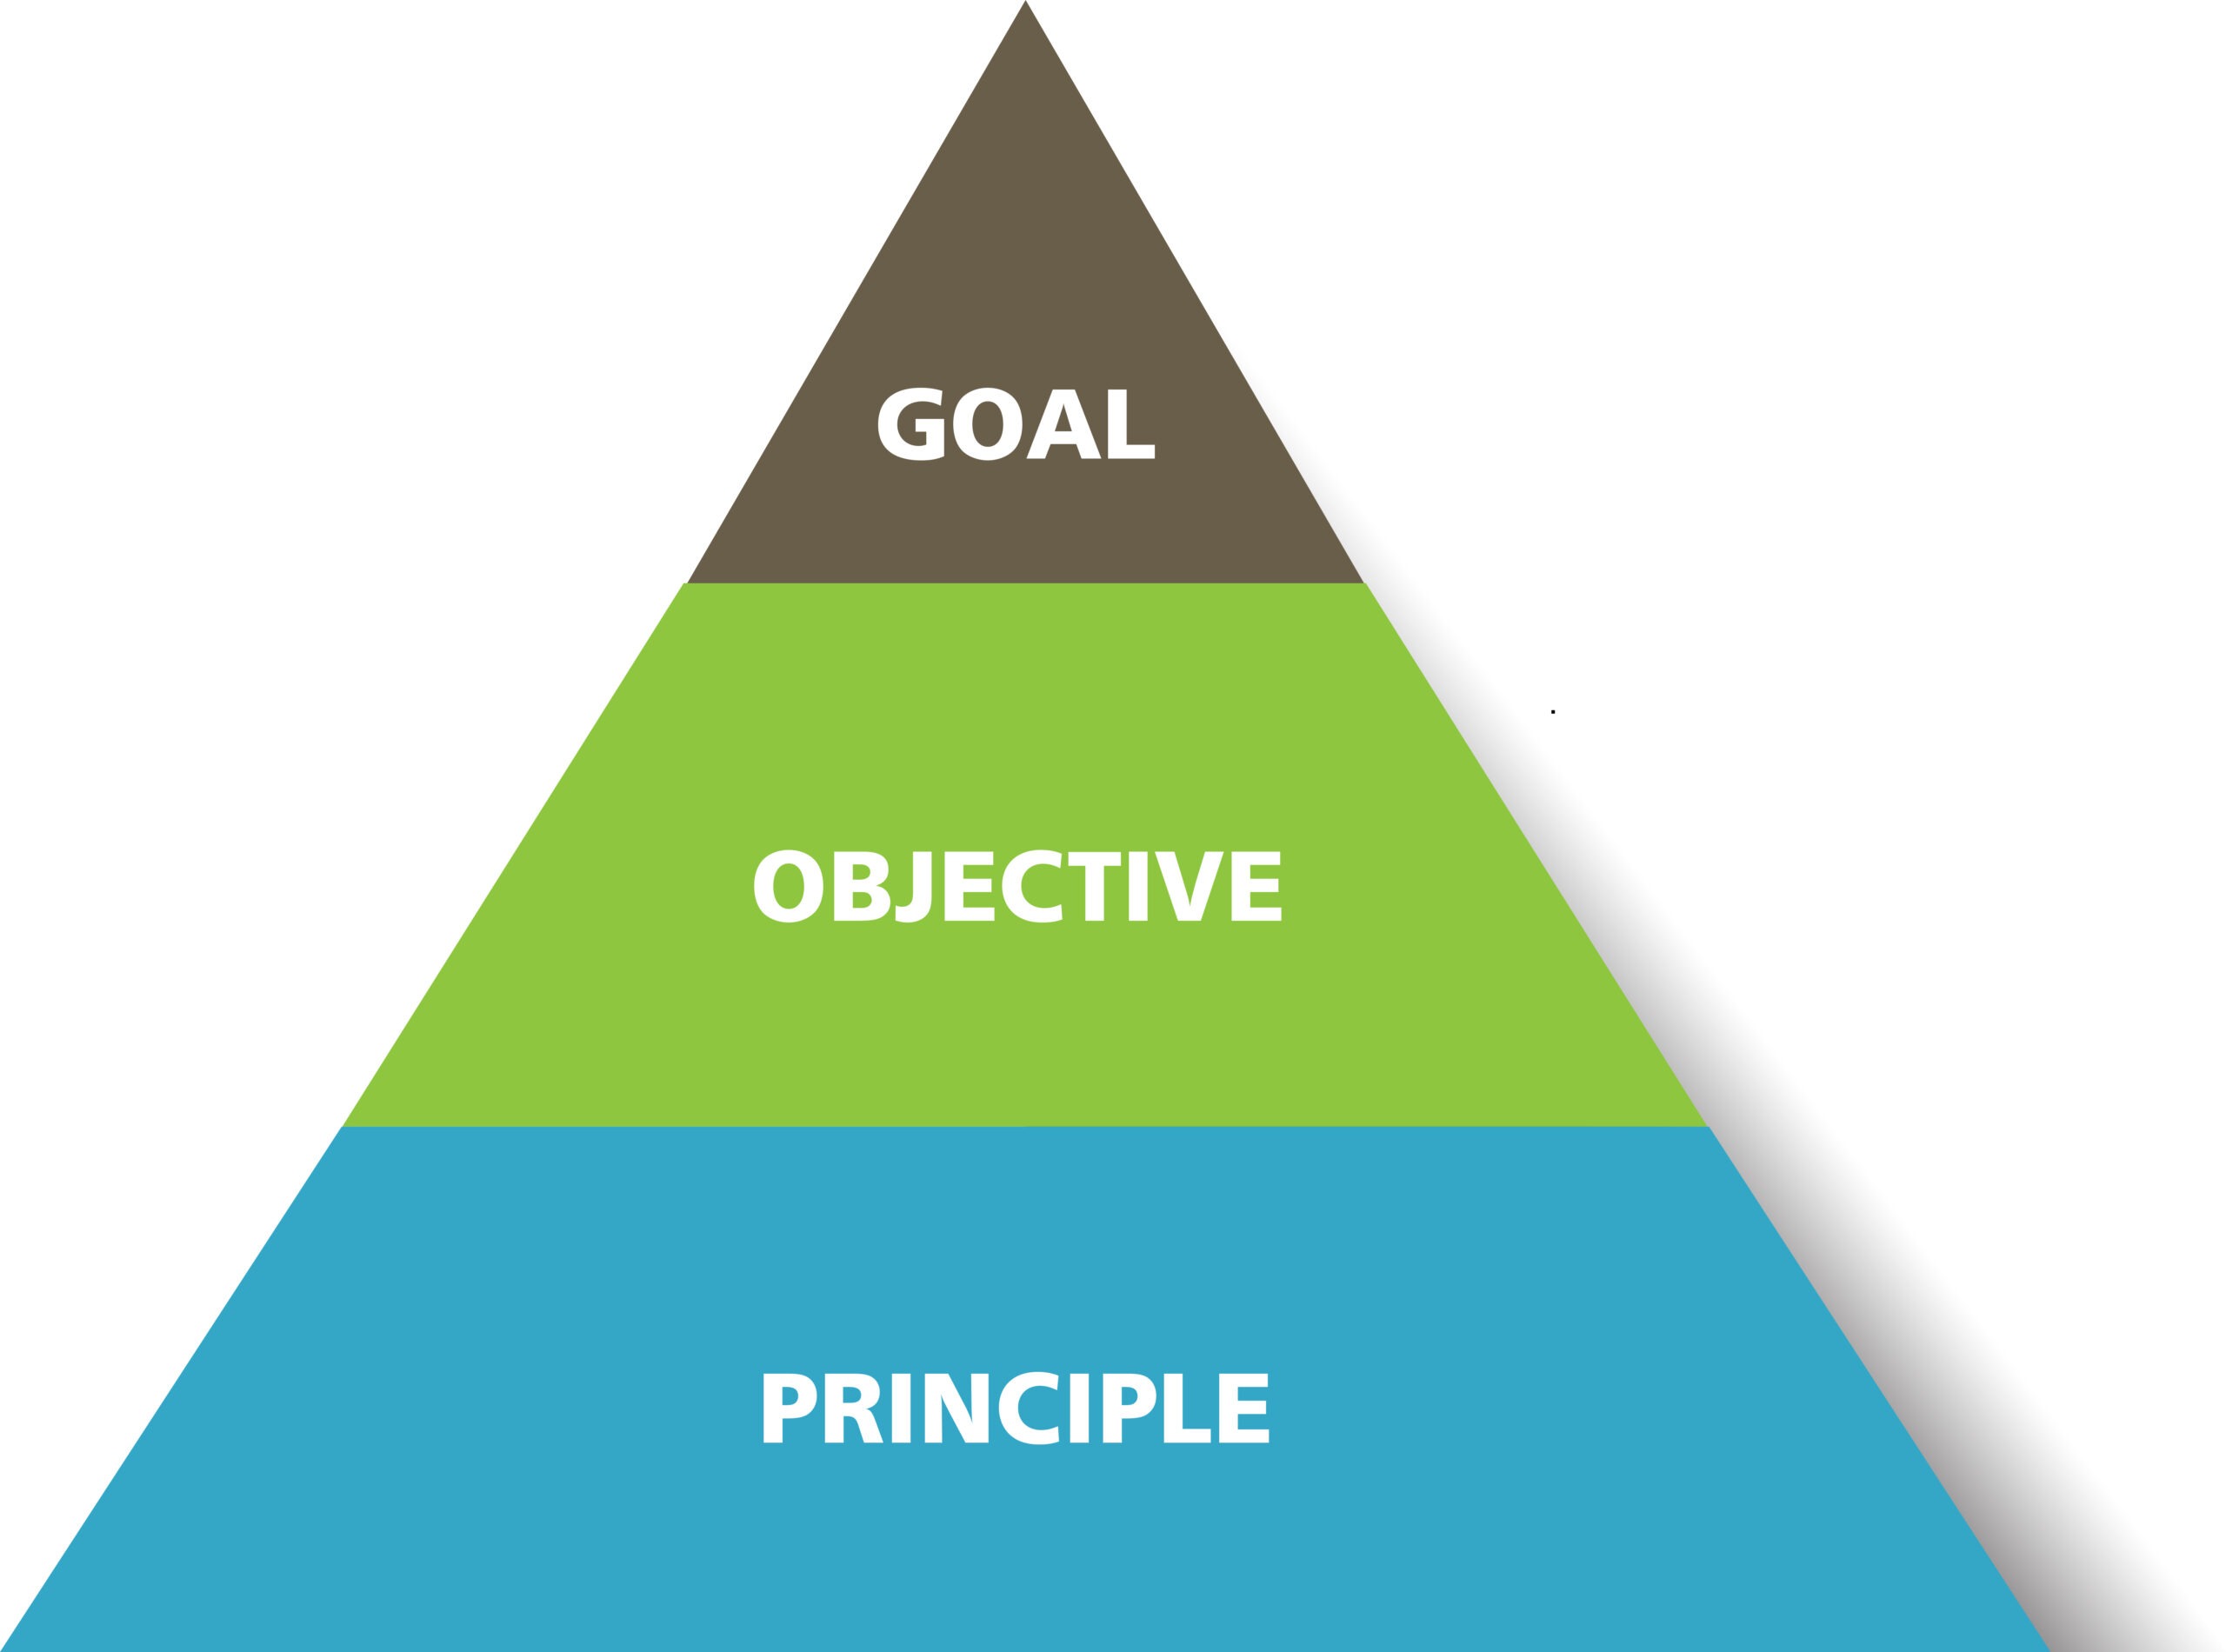 Tiered pyramid with three layers: goal, objective and principle.